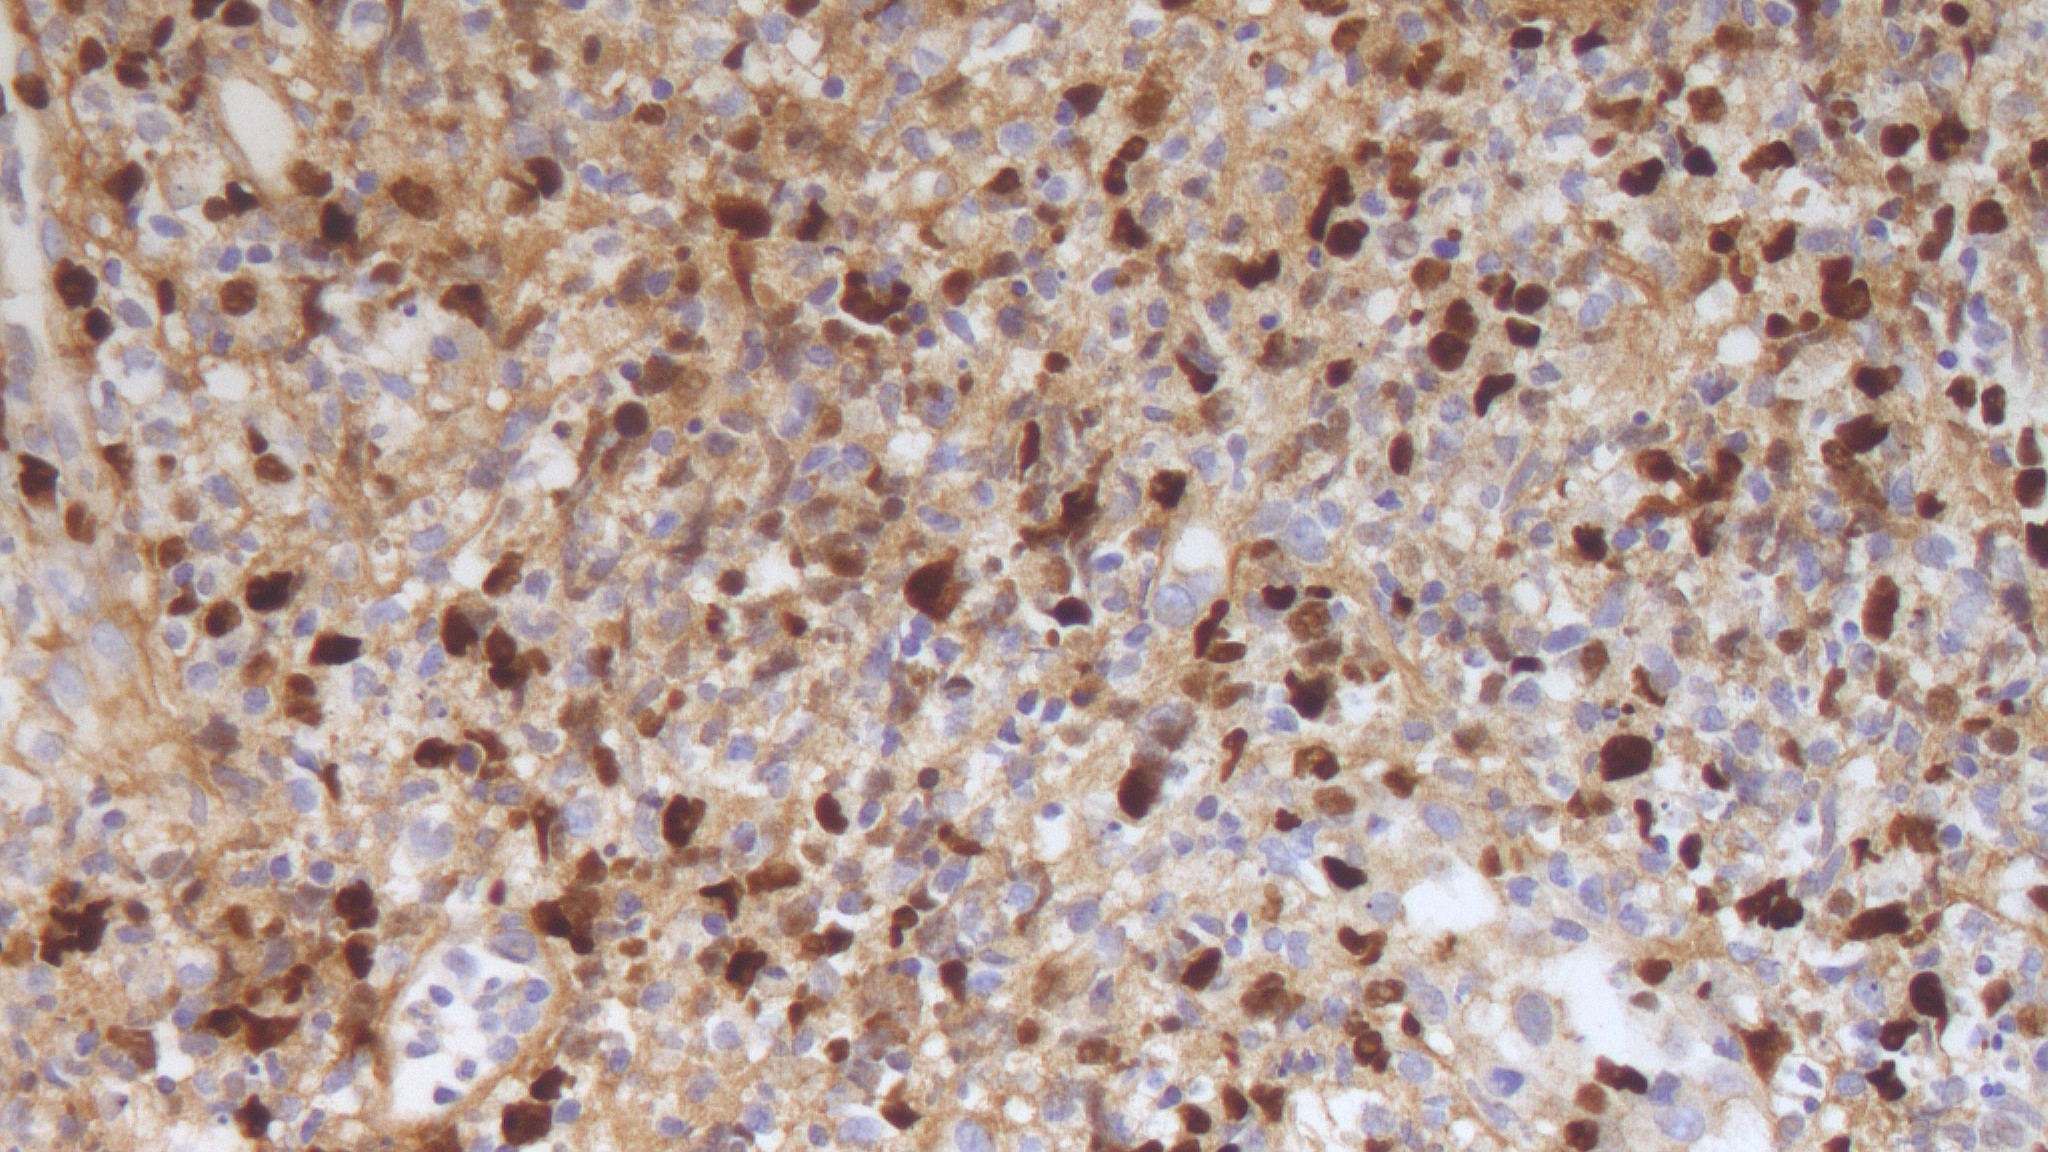 Expression of EBER in extranodal NK/T cell lymphoma